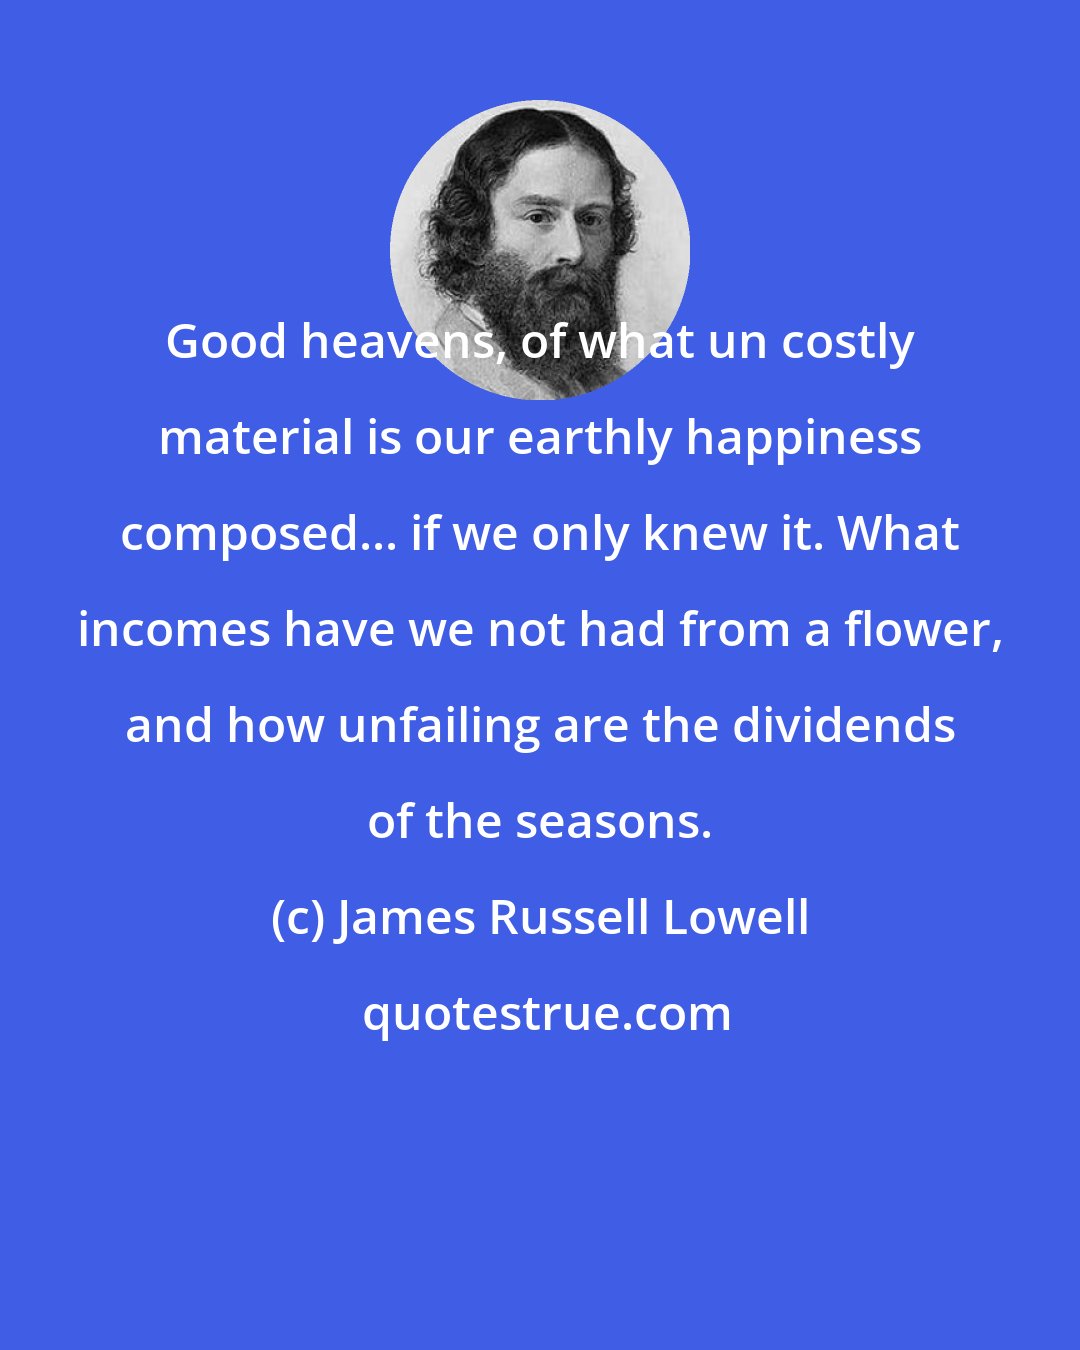 James Russell Lowell: Good heavens, of what un costly material is our earthly happiness composed... if we only knew it. What incomes have we not had from a flower, and how unfailing are the dividends of the seasons.